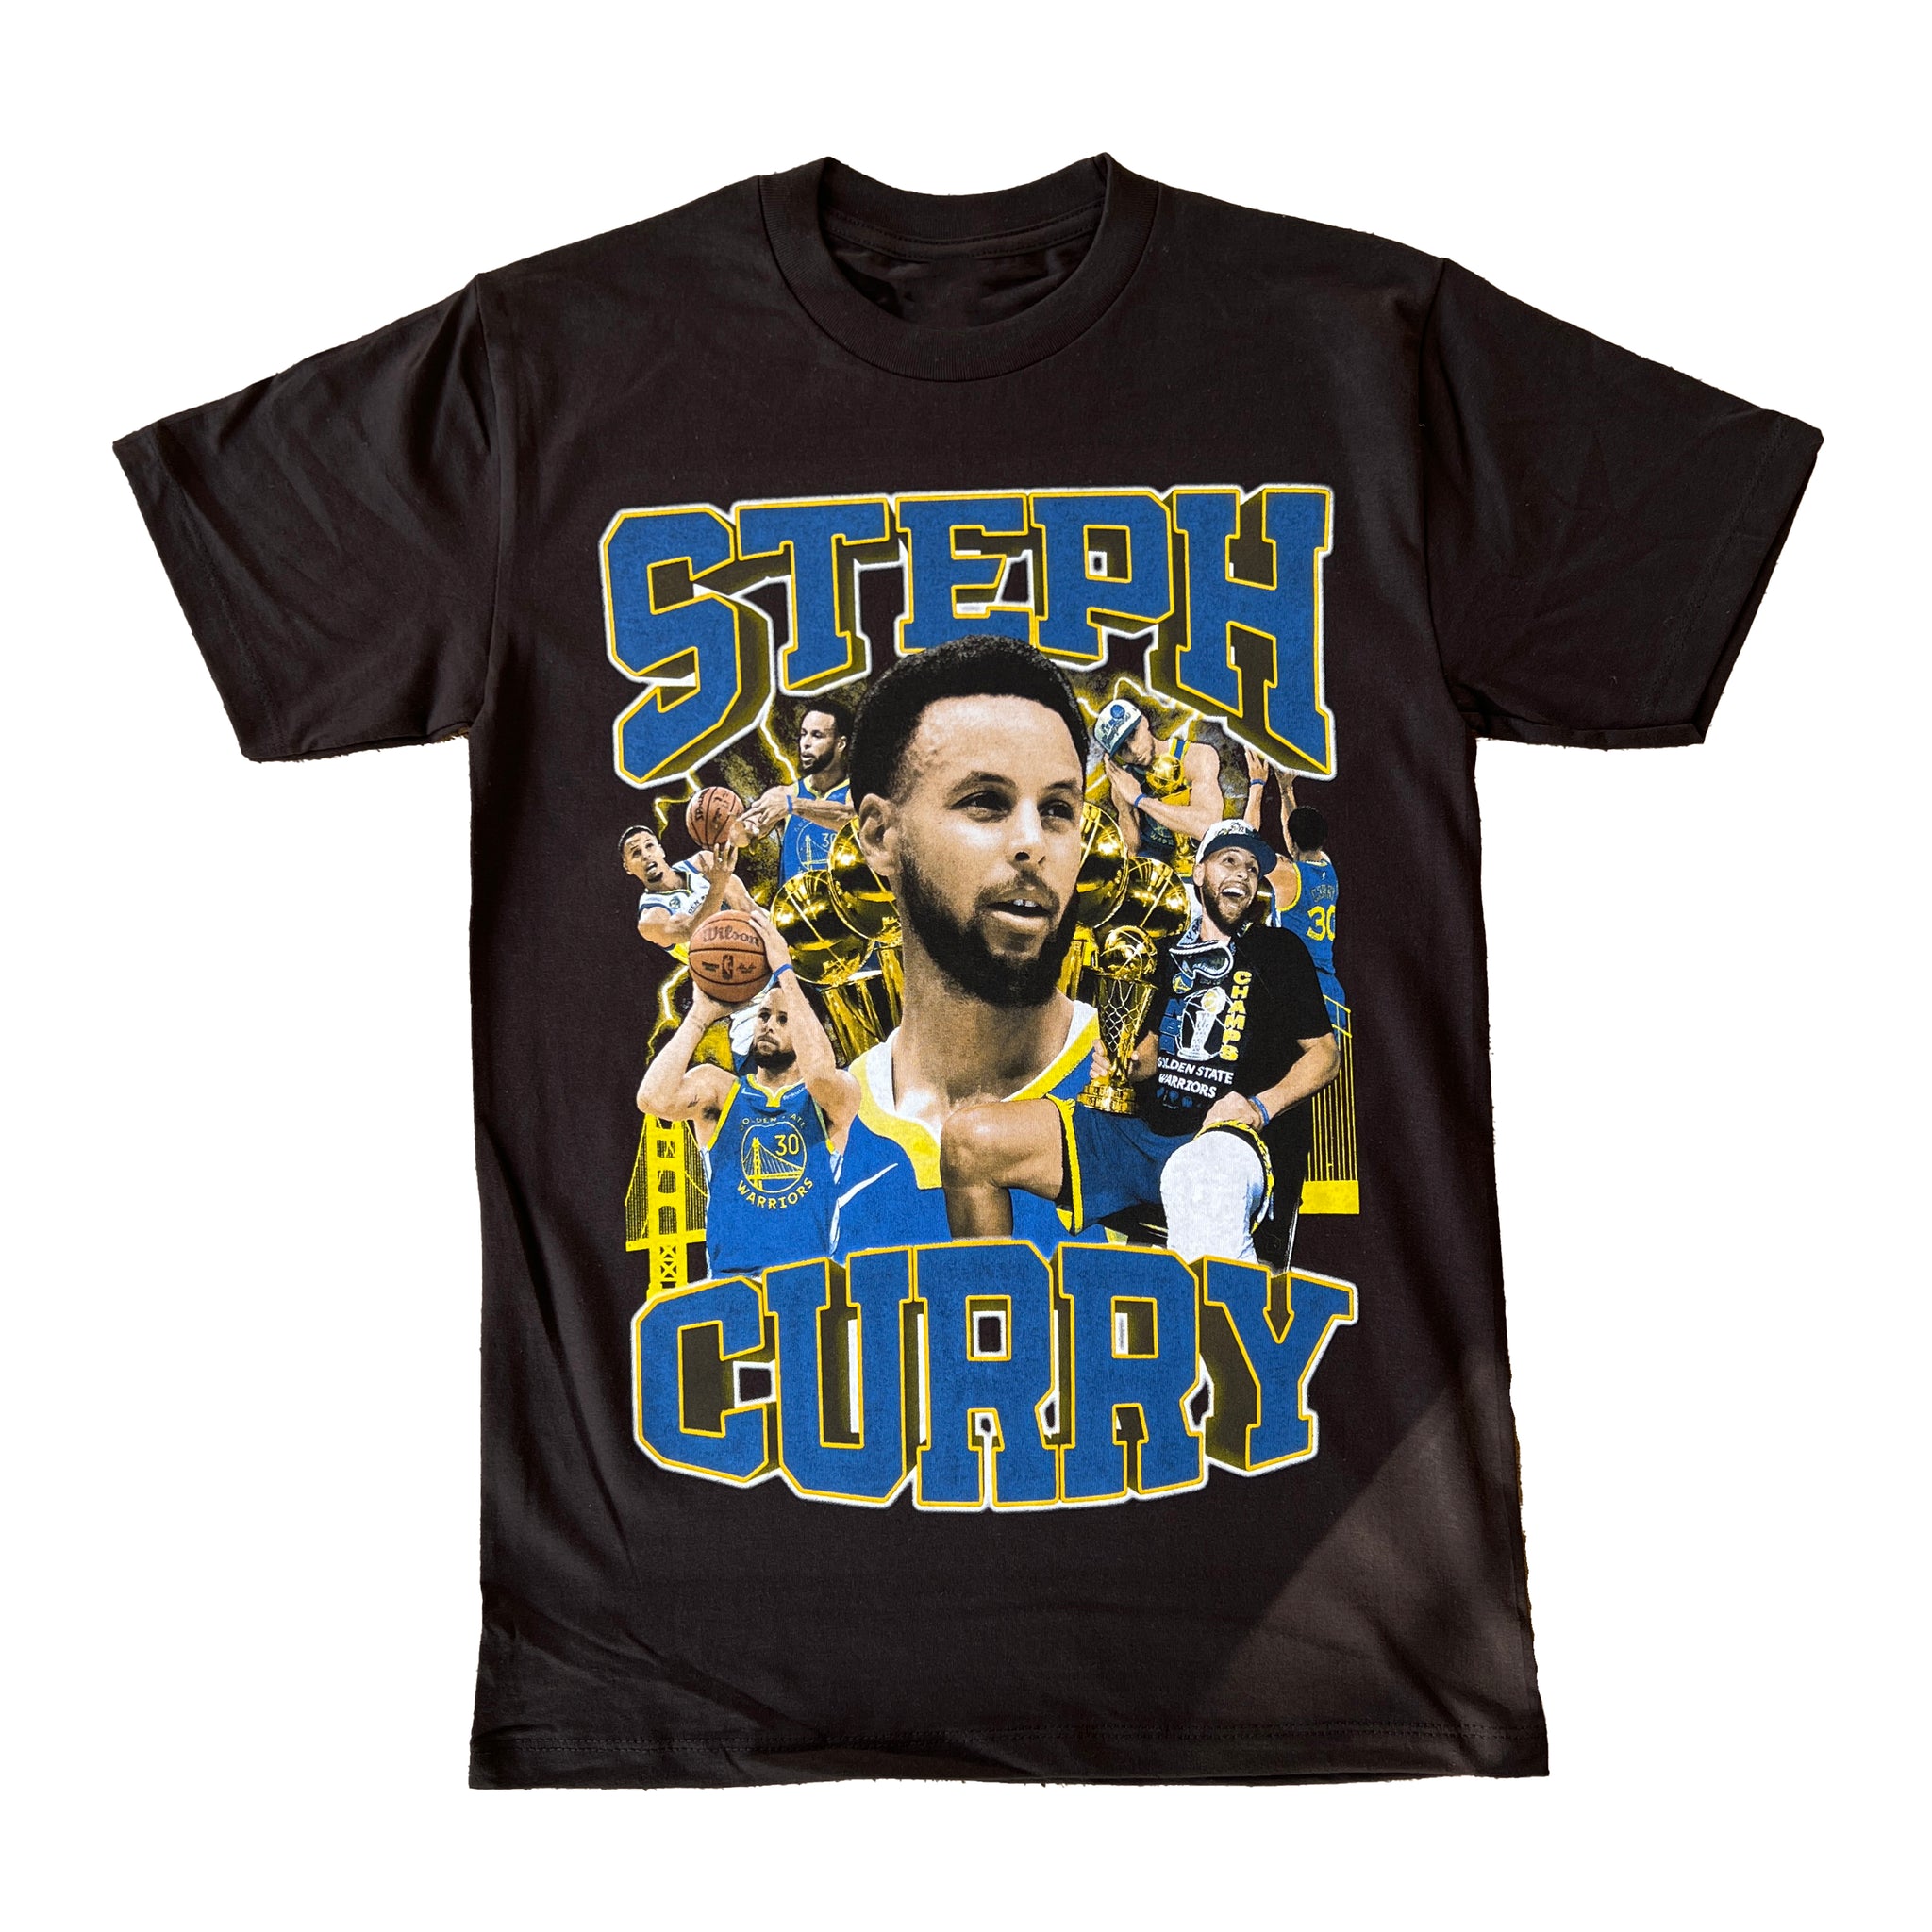 Steph Curry "Champion" Graphic Tee